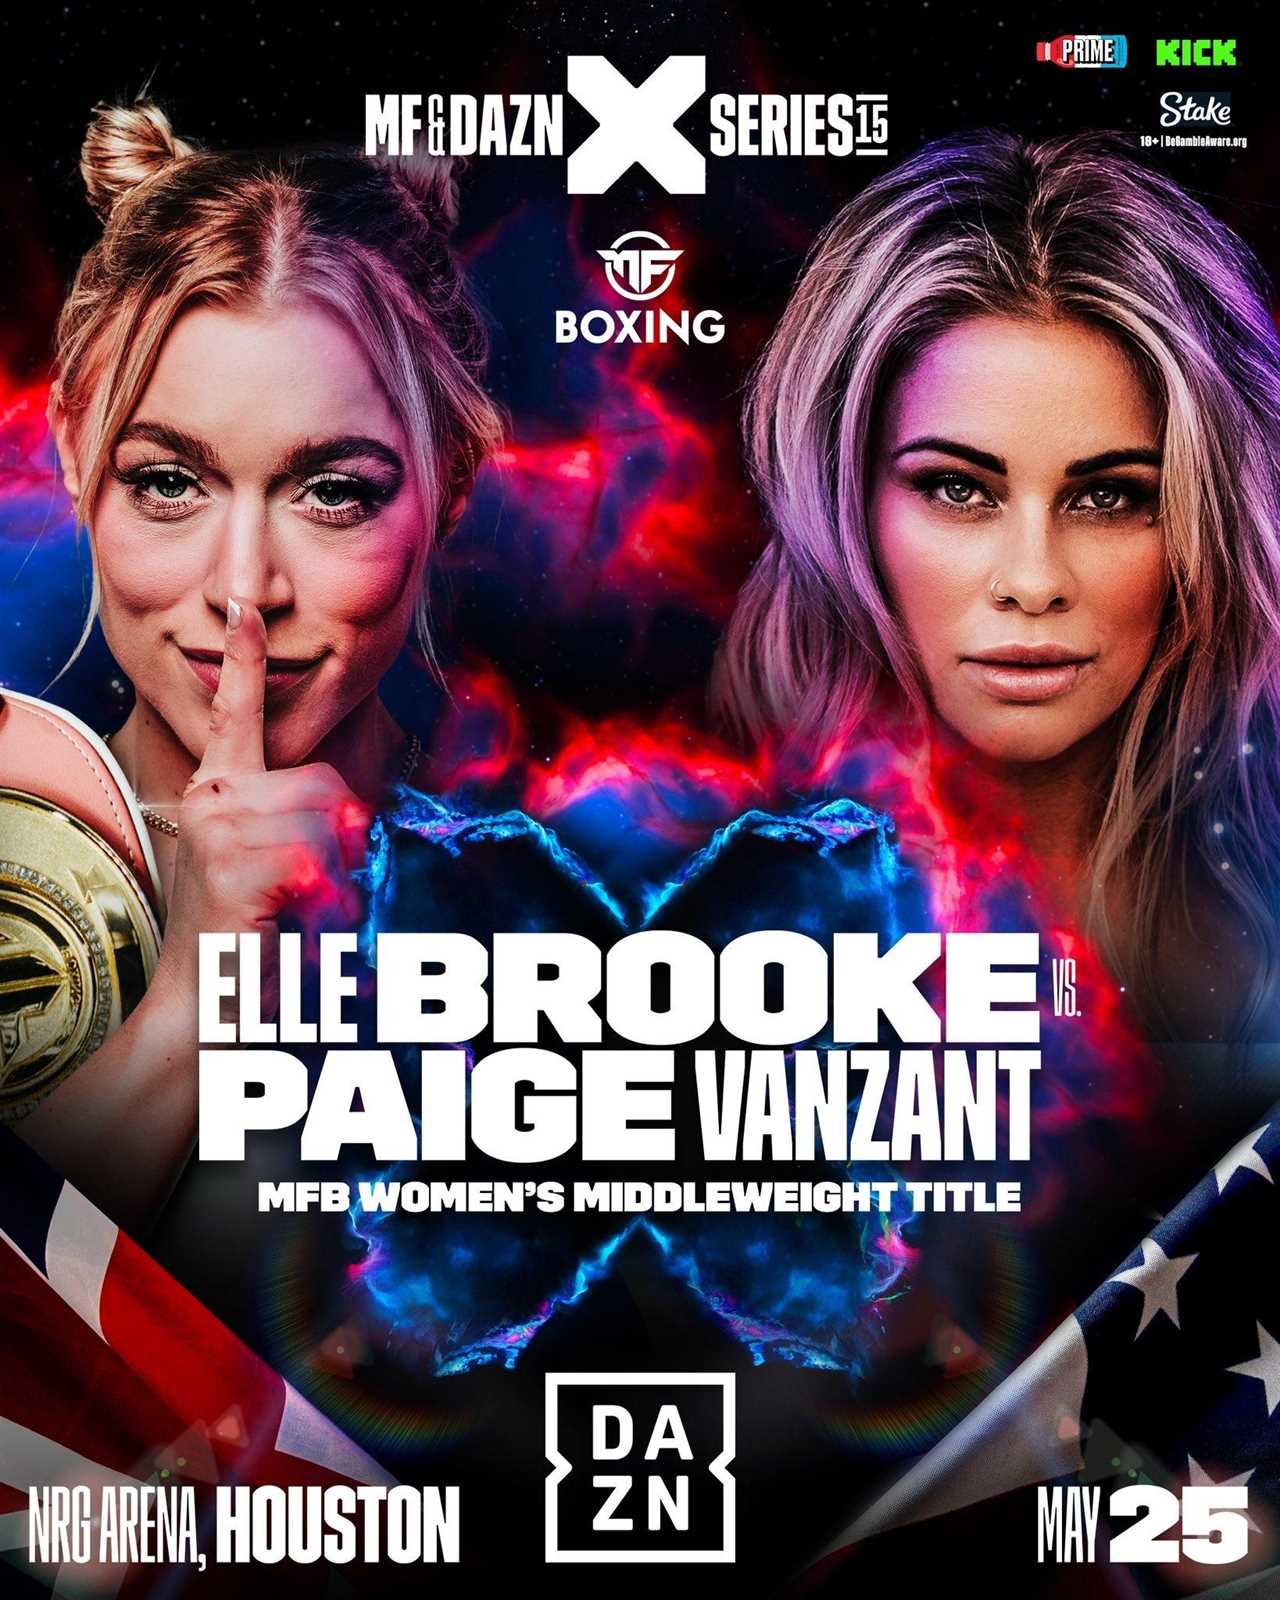 Elle Brooke vs Paige VanZant - All you need to know